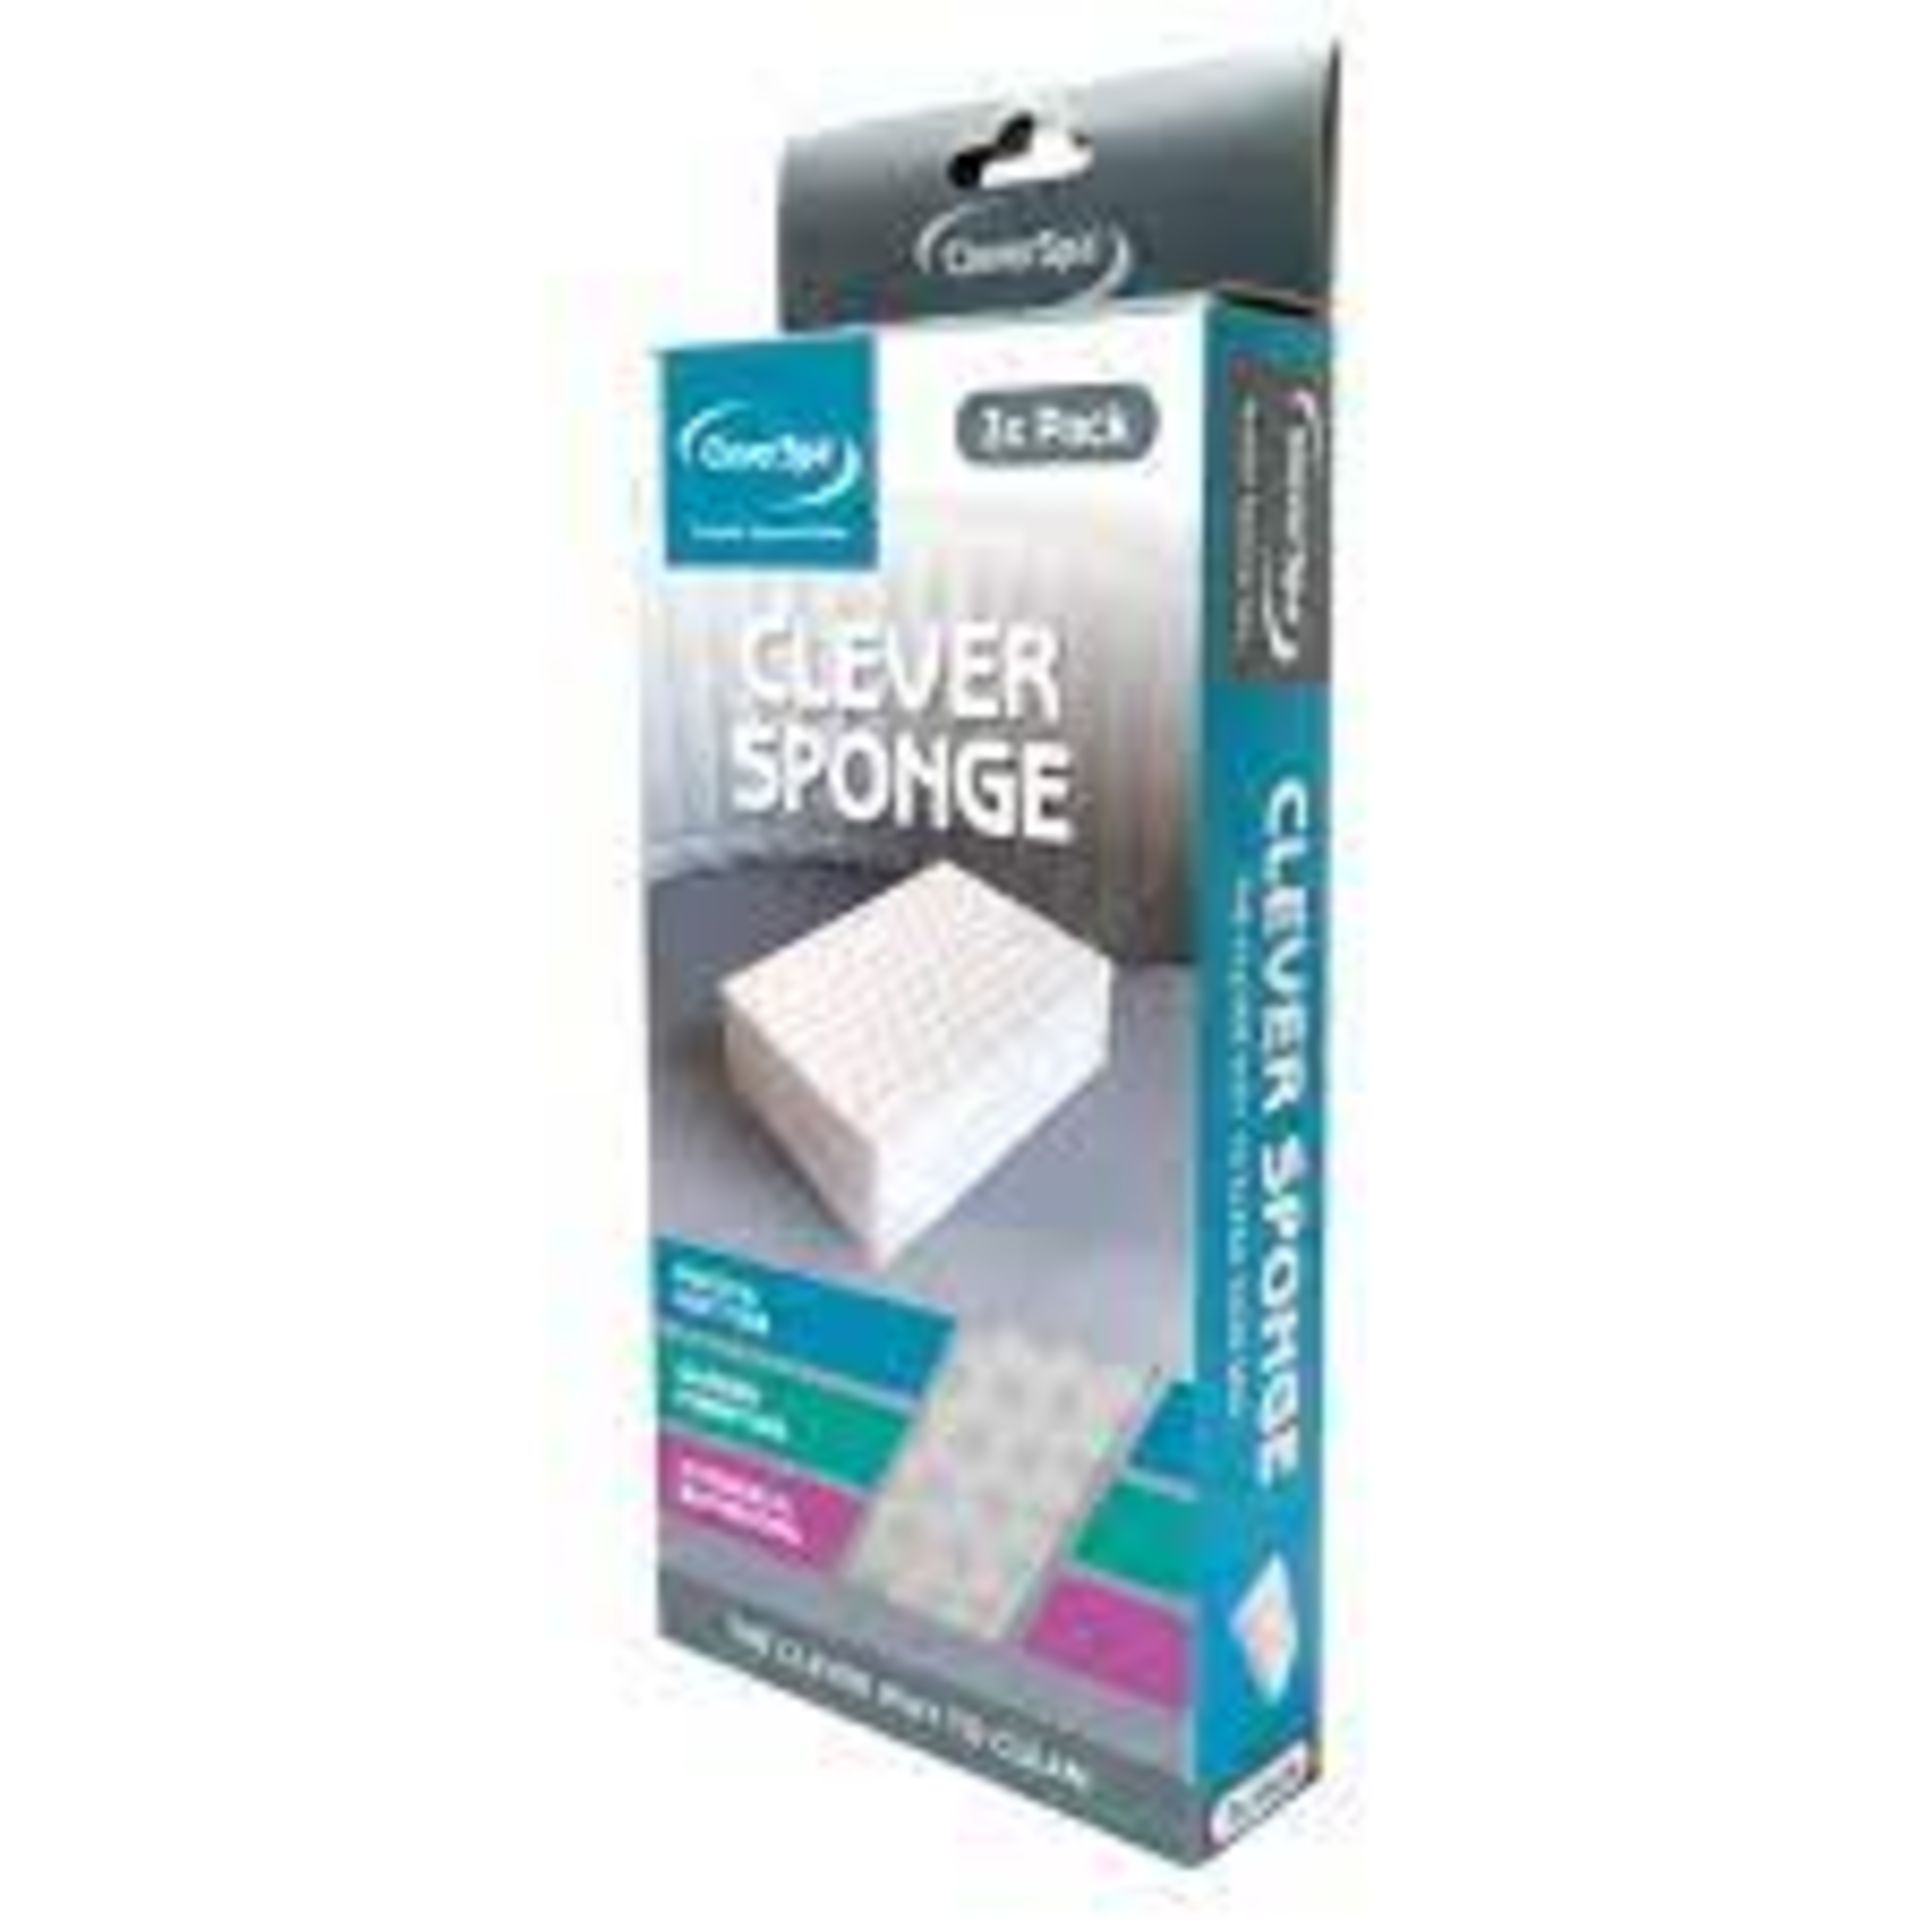 TRADE LOT 180 PACKS OF 3 NEW CLEVER SPA CLEANING SPONGES. ROW 11 MID